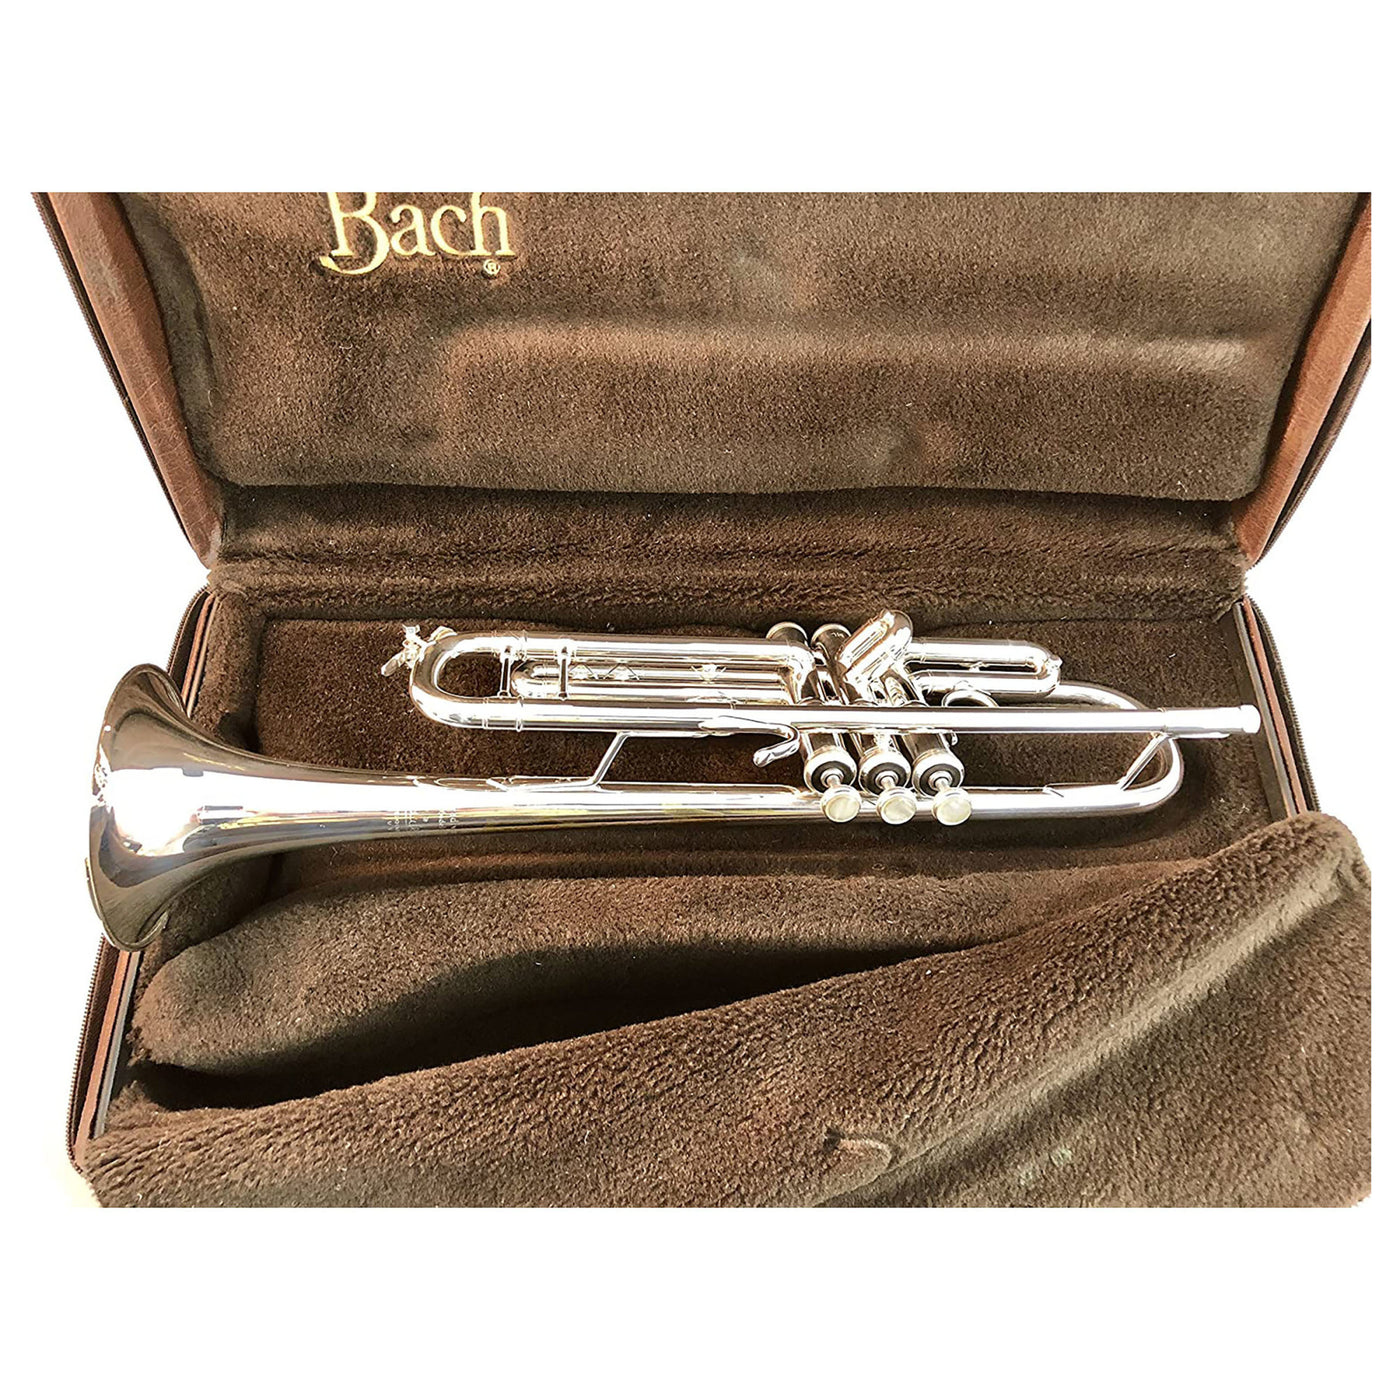 Bach 180S37 Trumpet Outfit - Silver